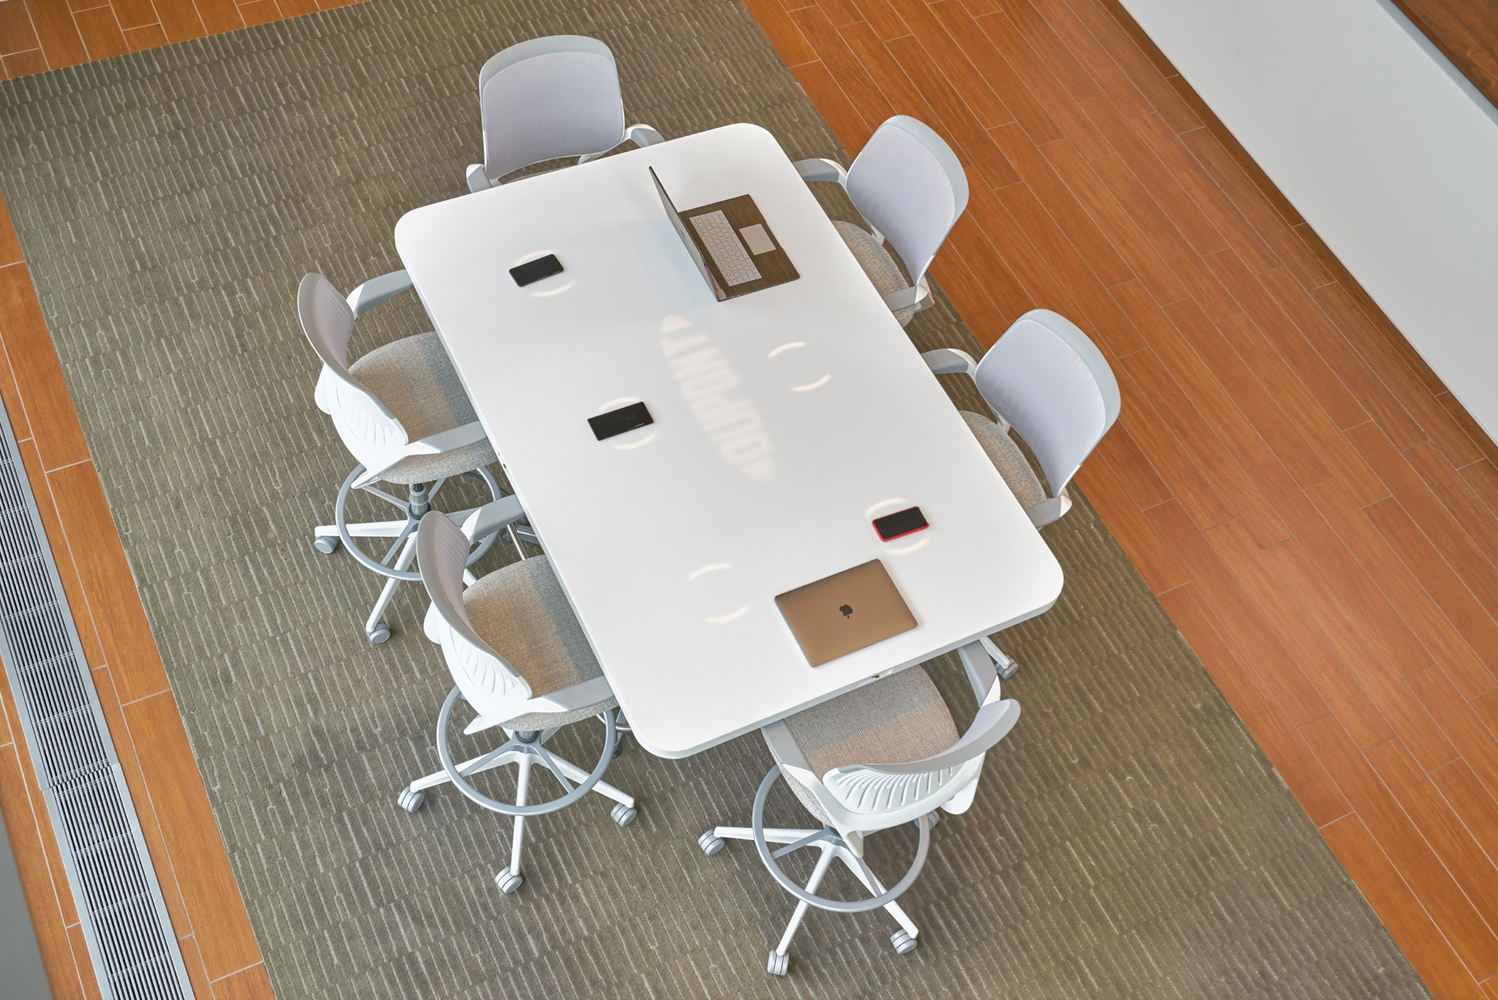 The table combines DuPonts experience in the fields of technology and design offering a collaboration solution with confe